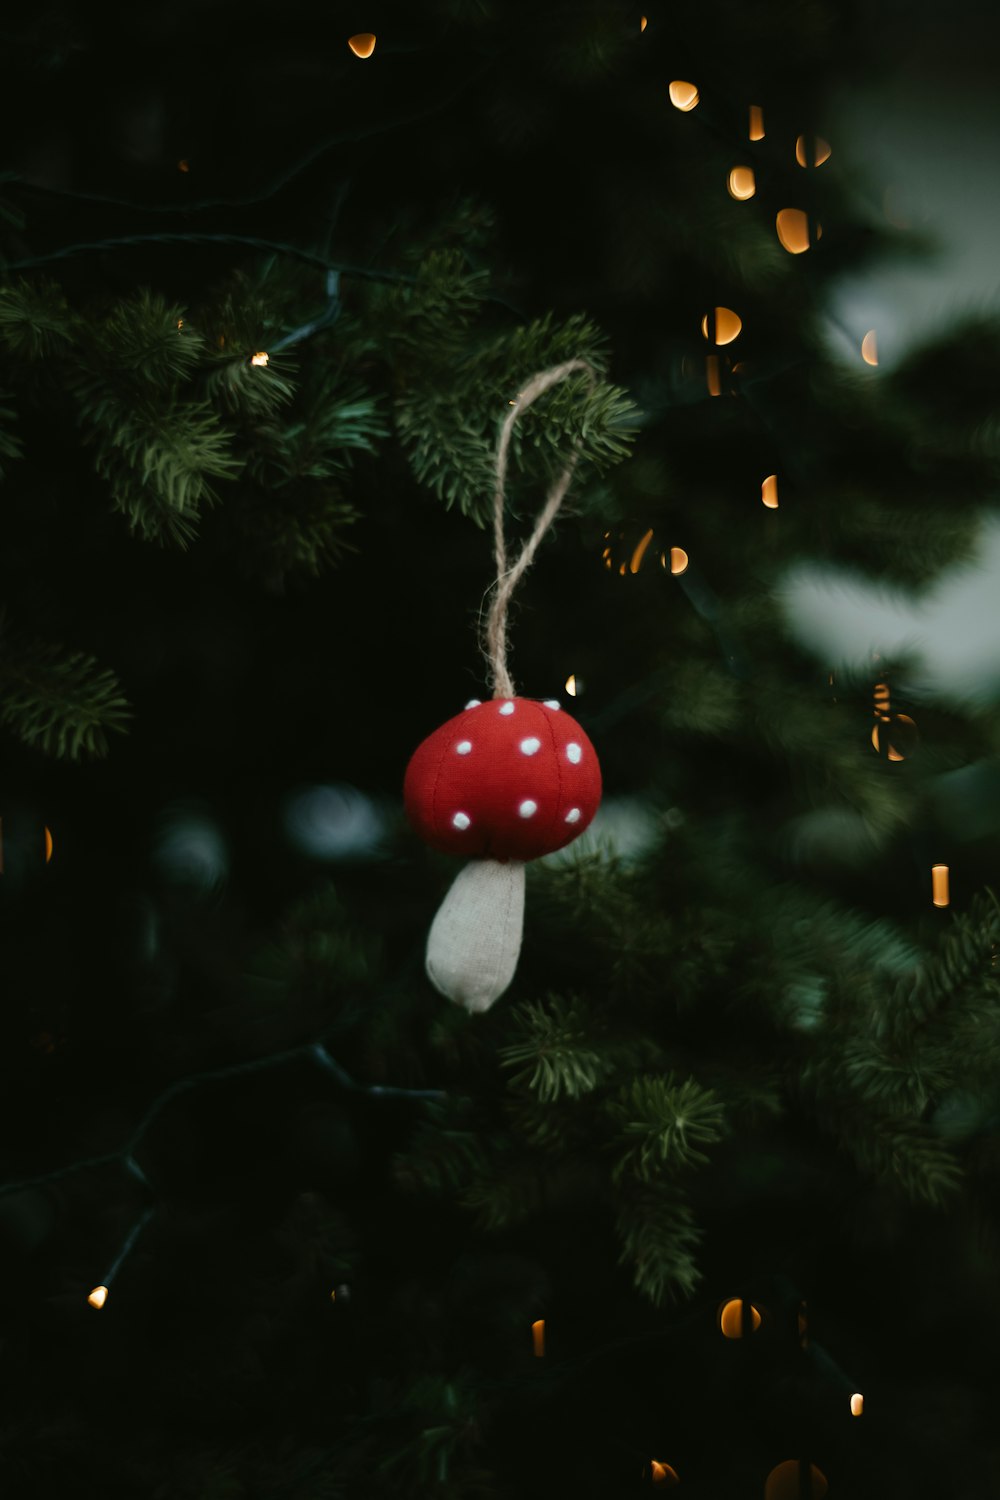 a mushroom ornament hanging from a christmas tree